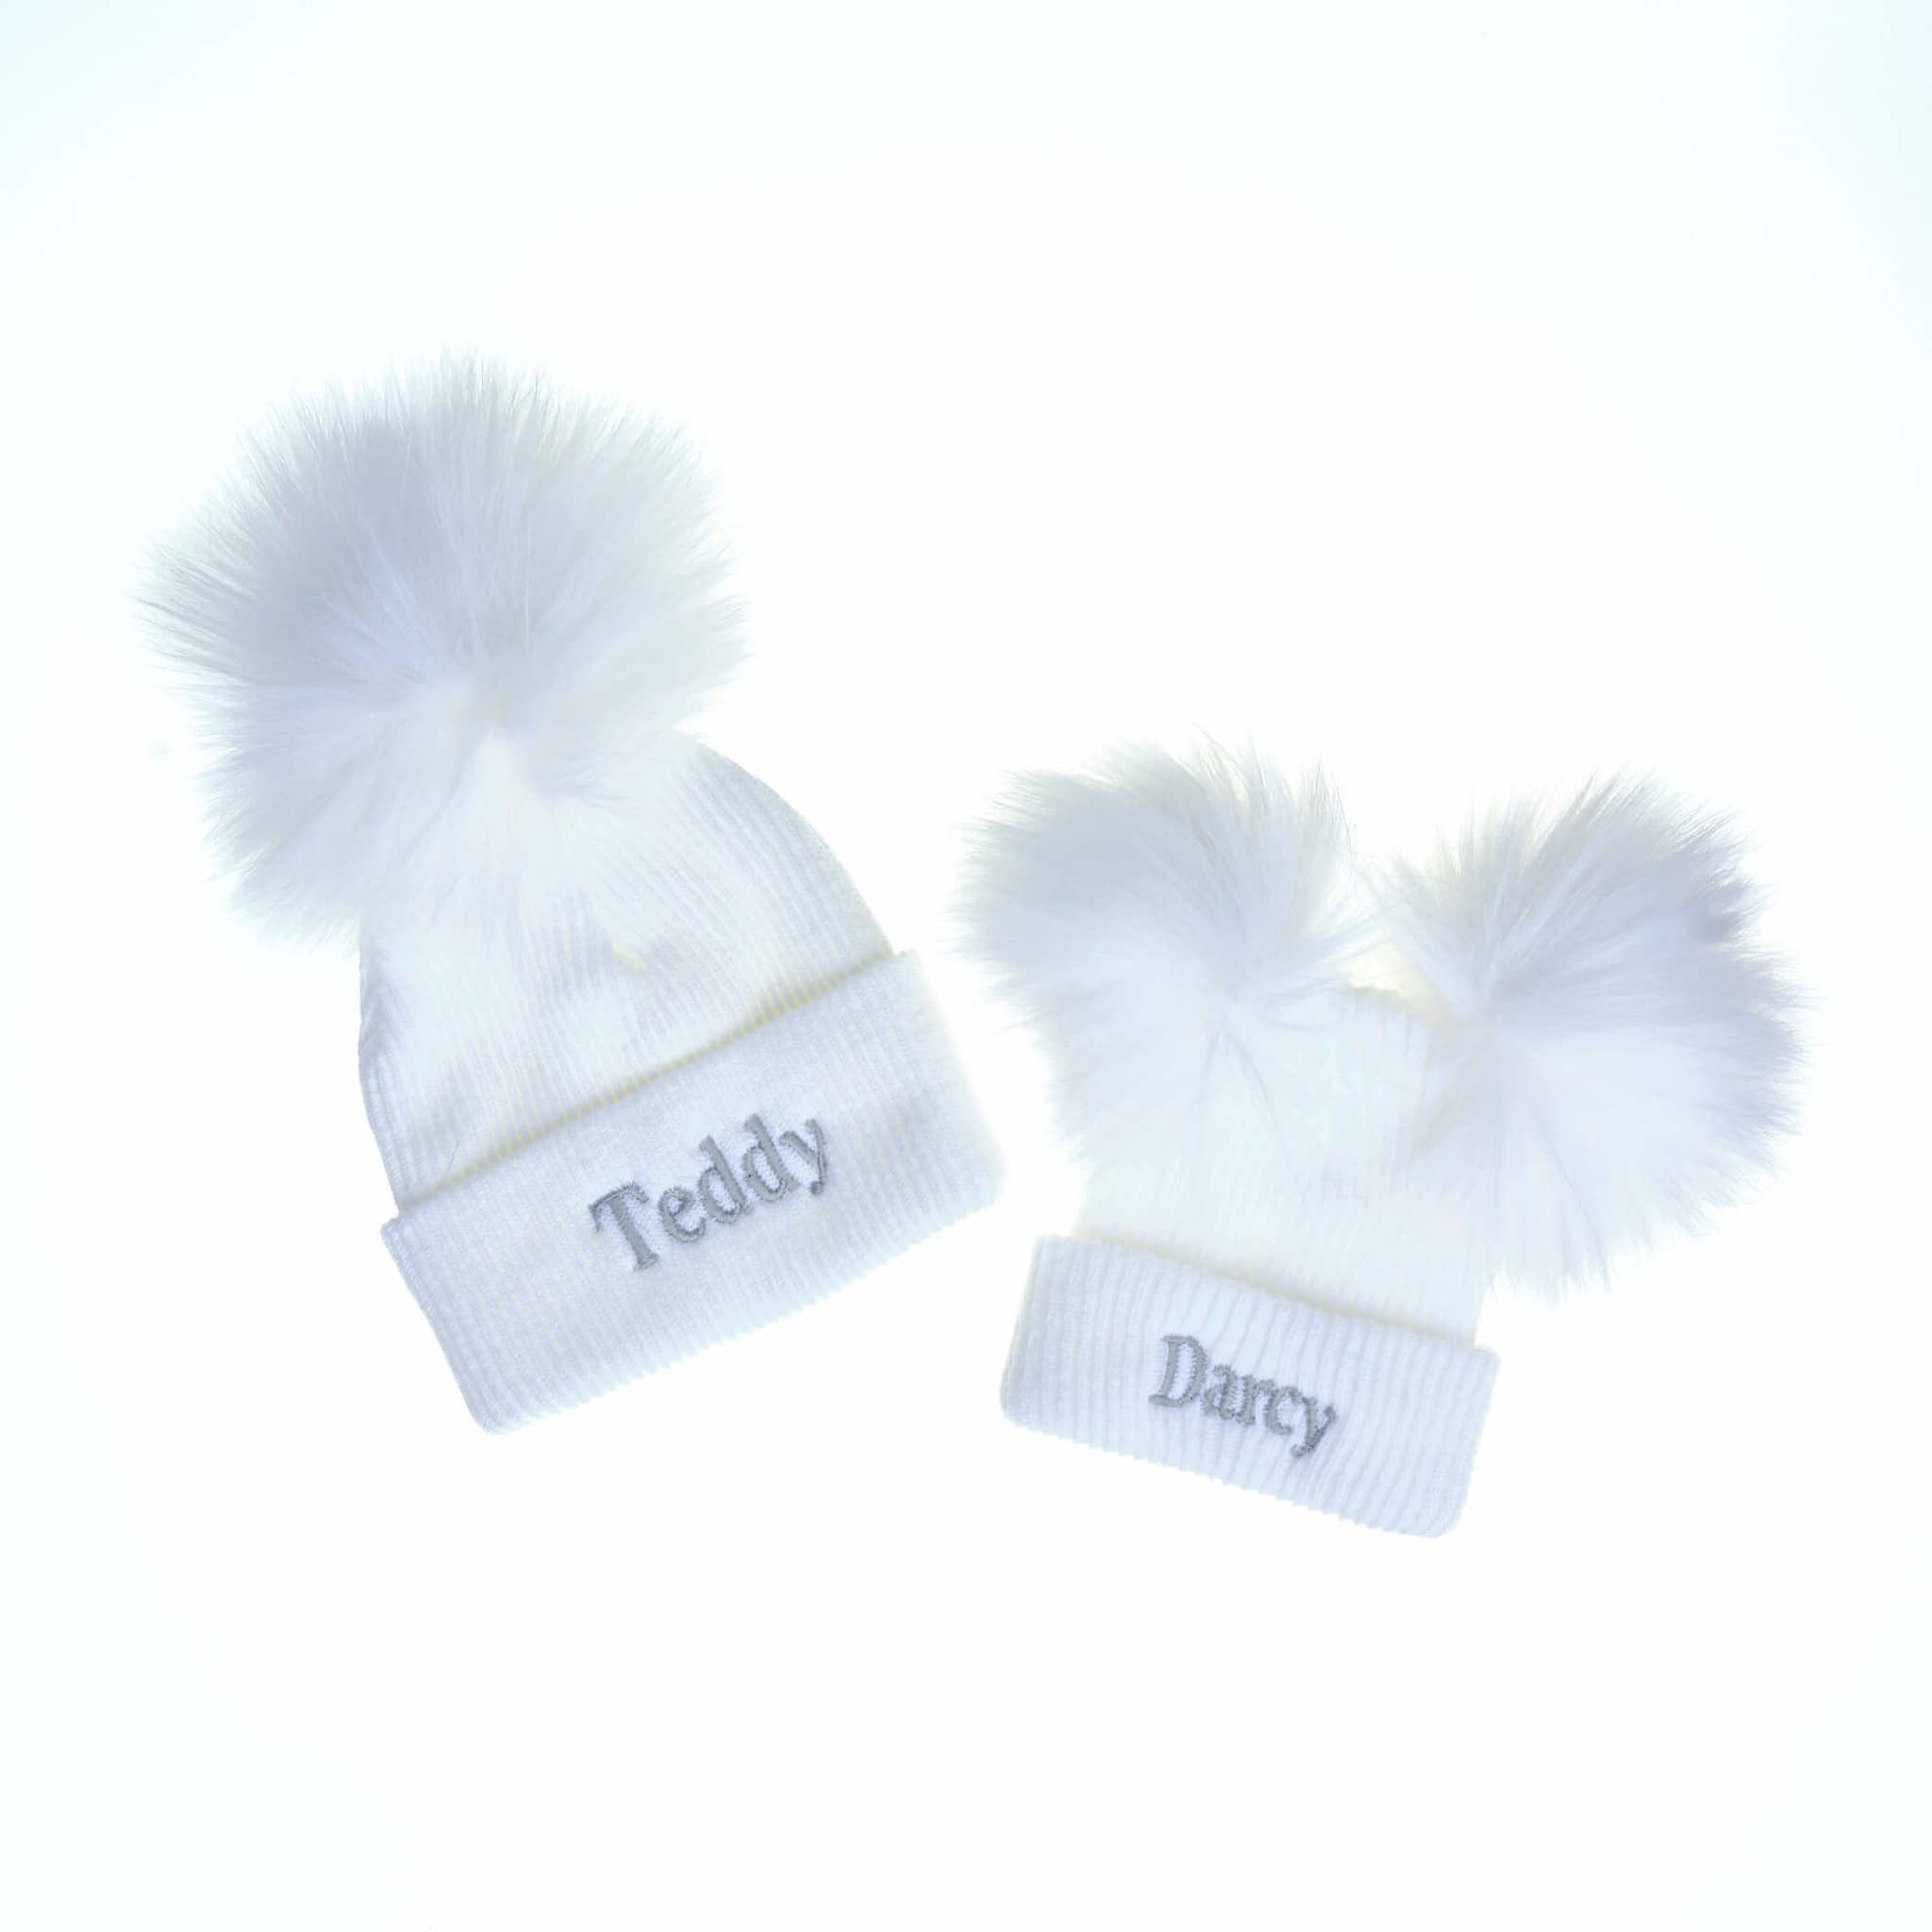 Personalised Baby Hat 100% Super Soft Double Layered Cotton 